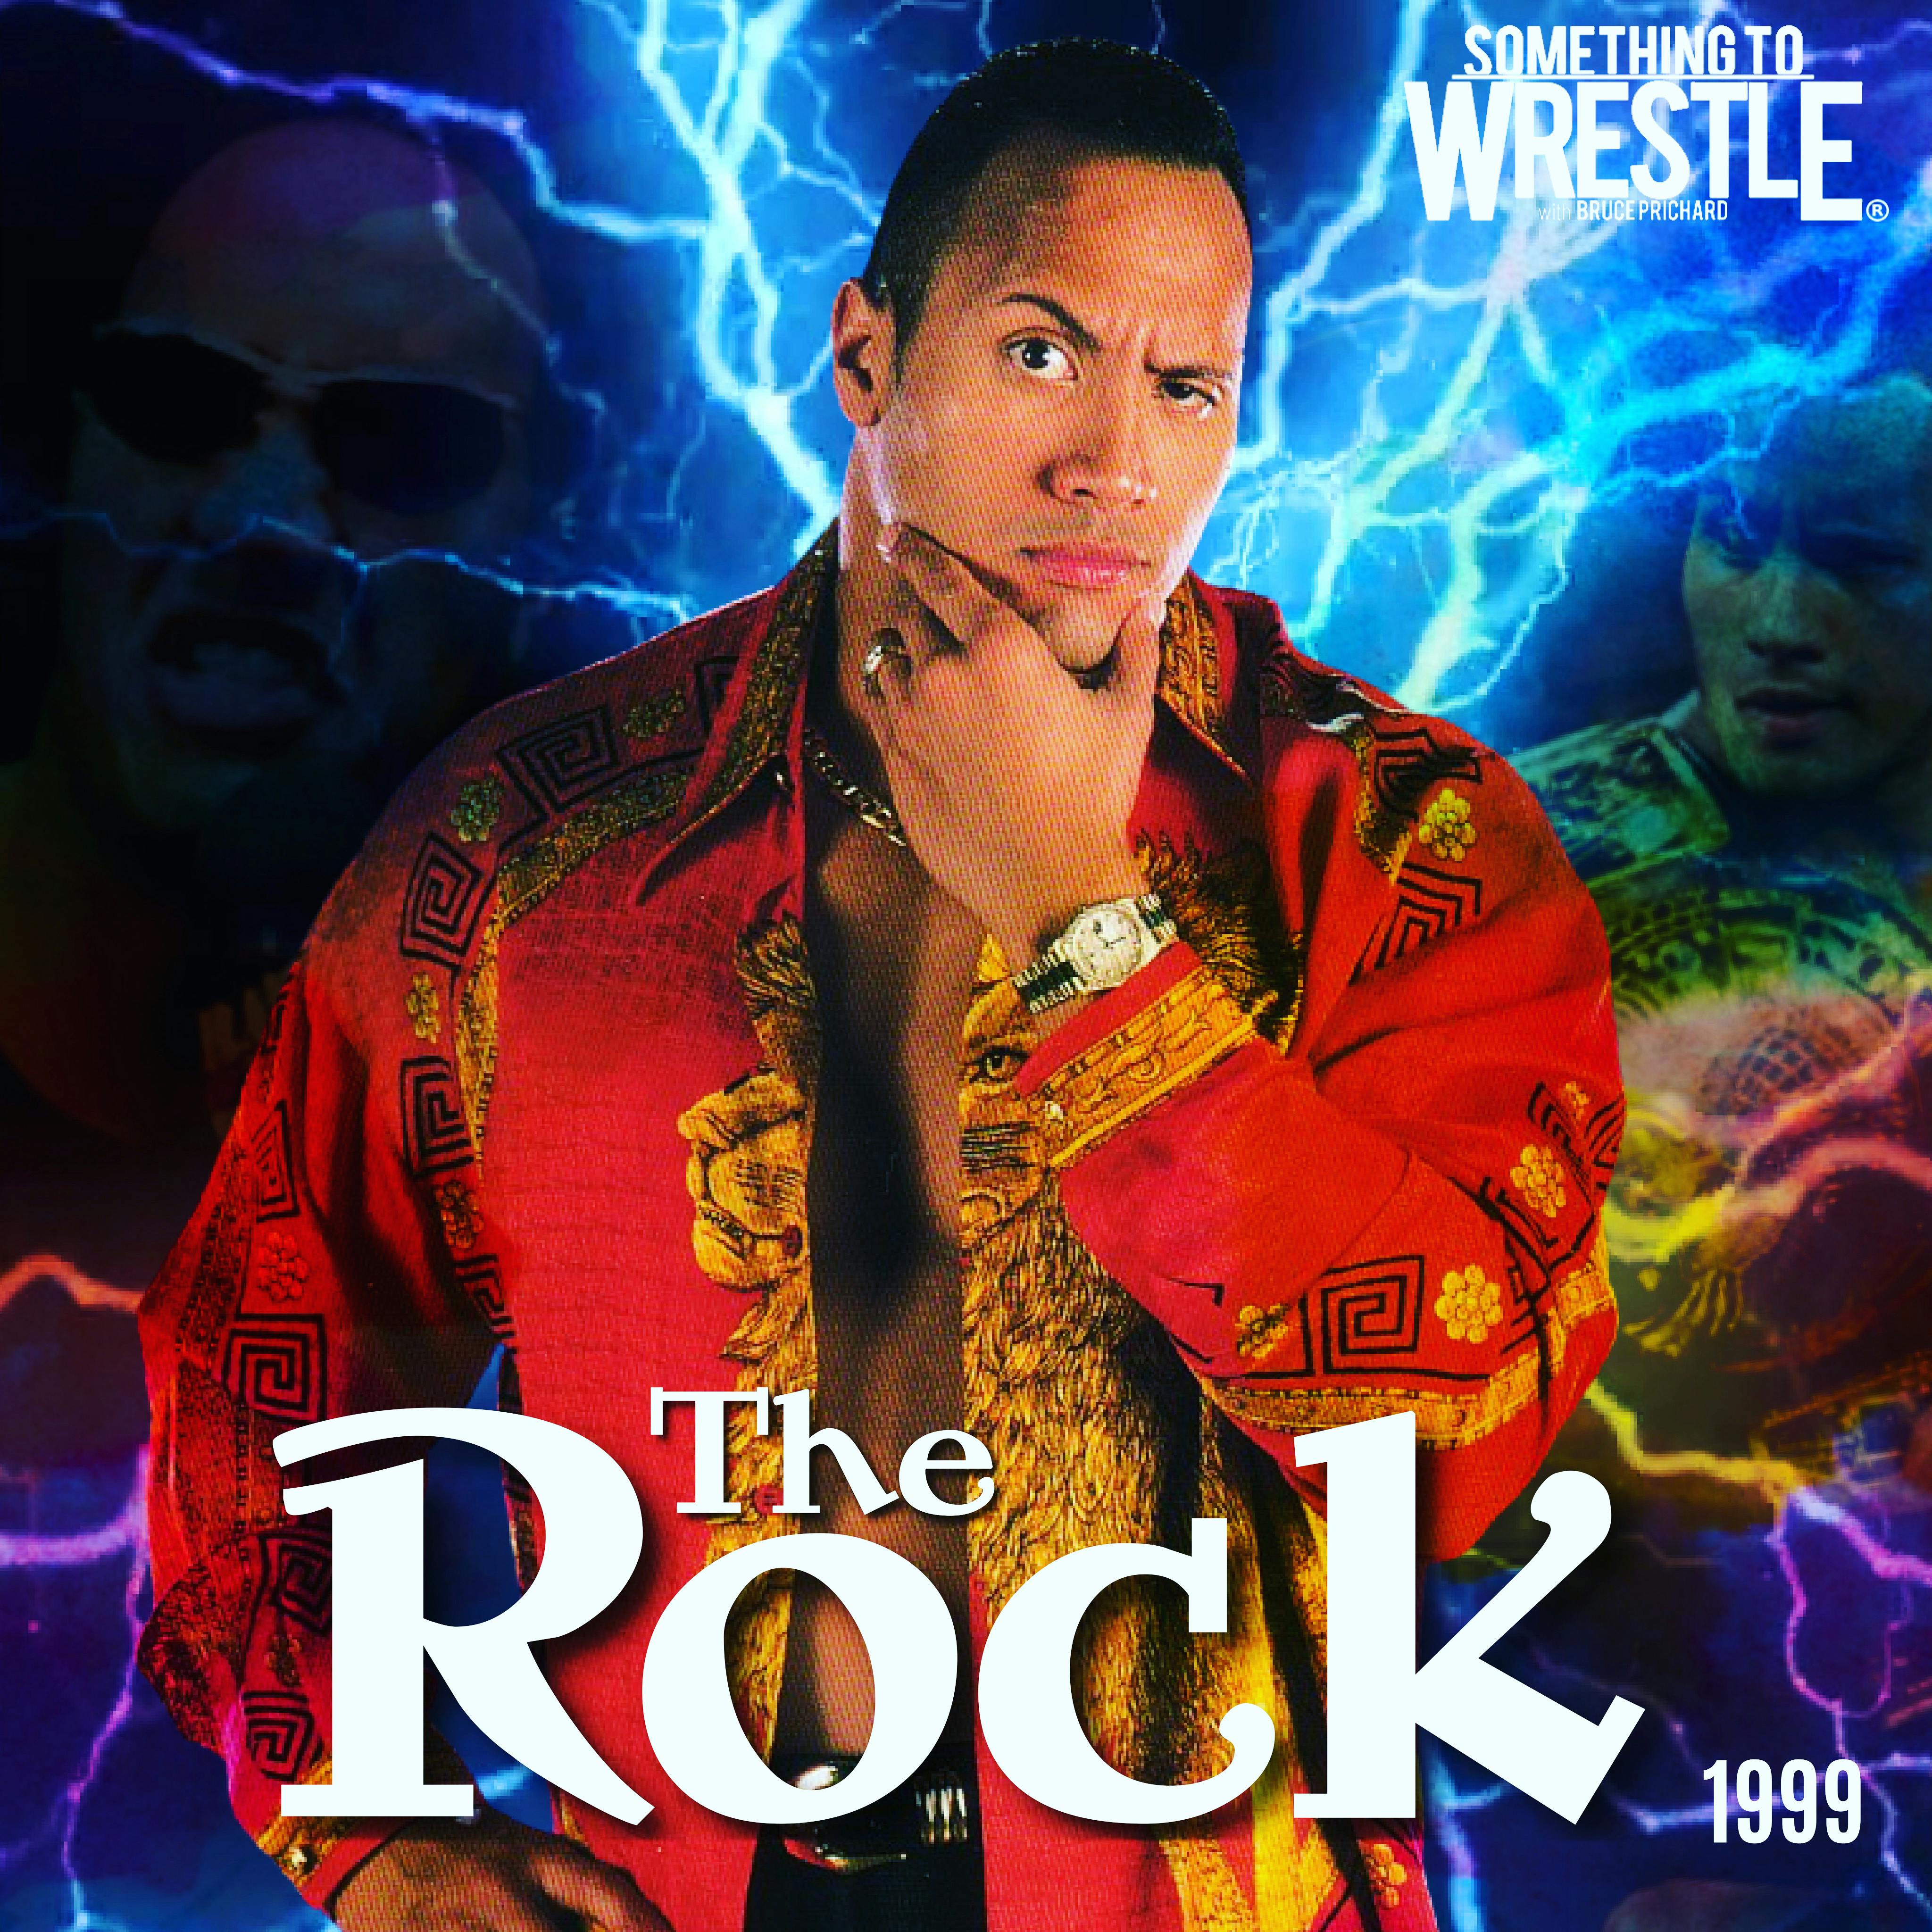 Episode 230: The Rock 1999